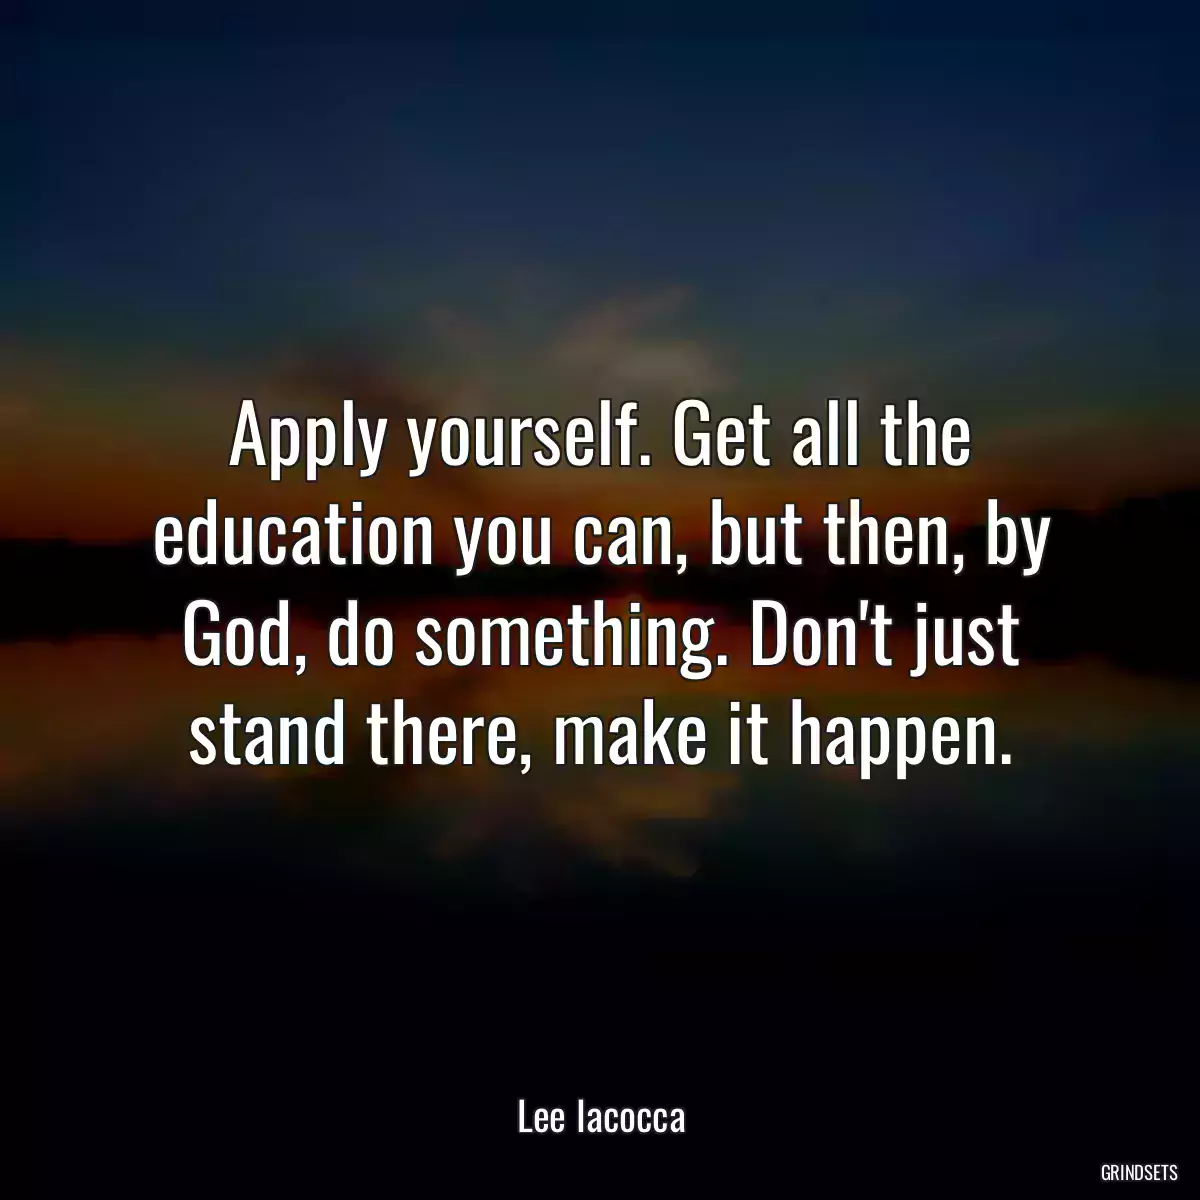 Apply yourself. Get all the education you can, but then, by God, do something. Don\'t just stand there, make it happen.